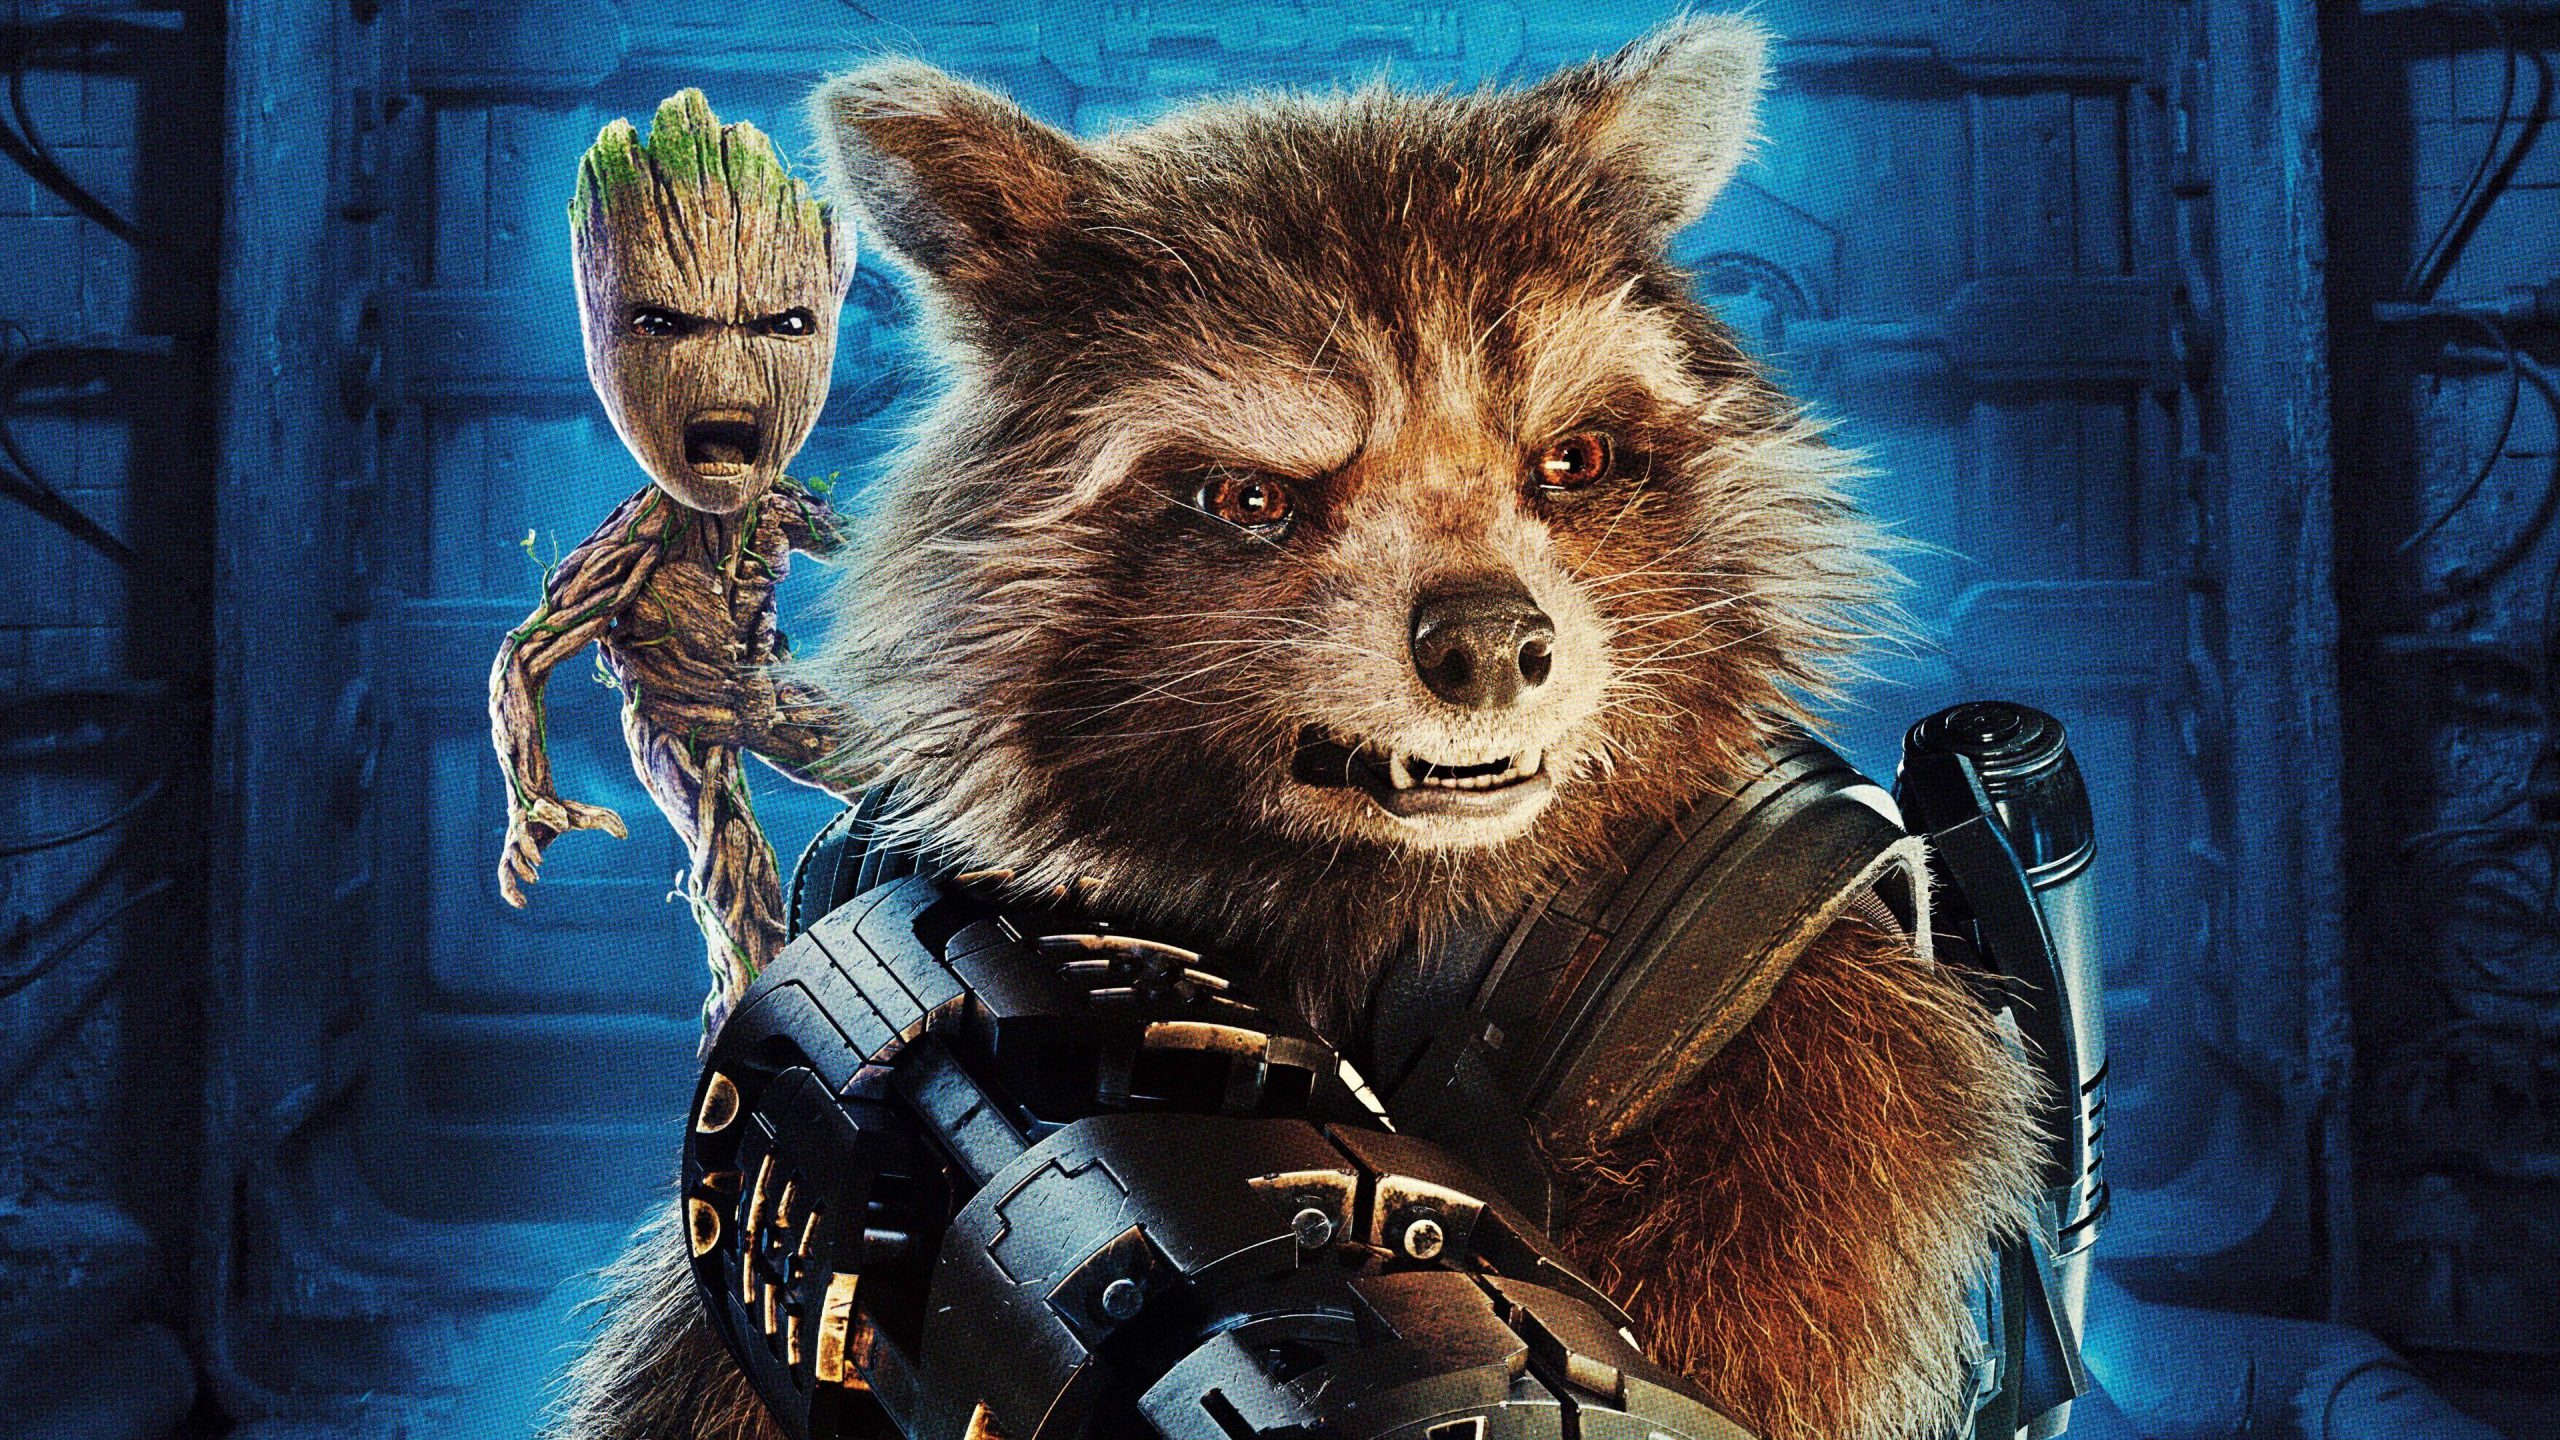 Cute Baby Groot Guardians Of The Galaxy Iphone Wallpaper, Cute Baby Groot Guardians Of The Galaxy, Movies